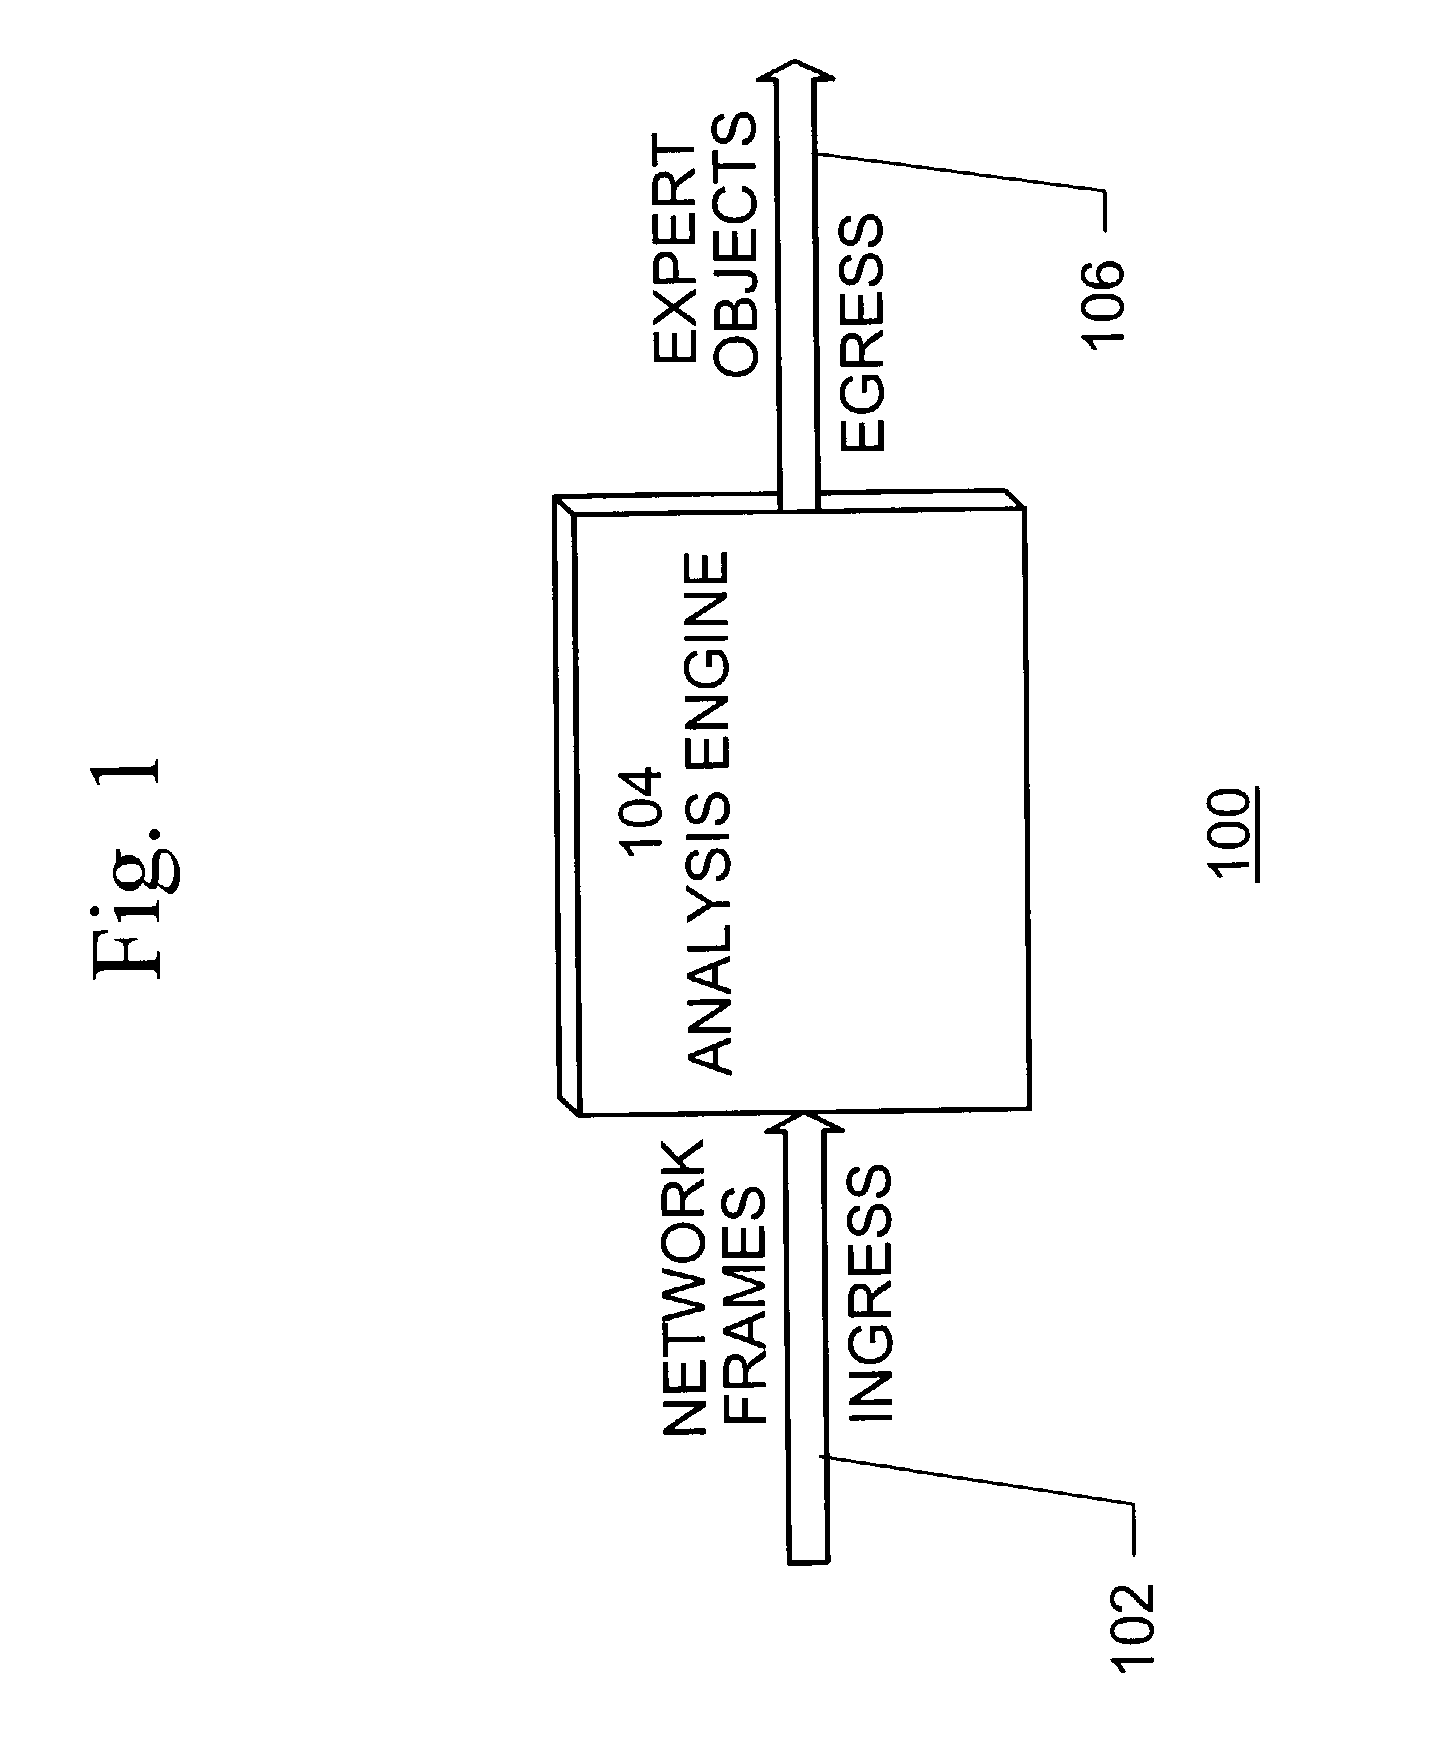 Method and system for network traffic analysis with configuration enhancements